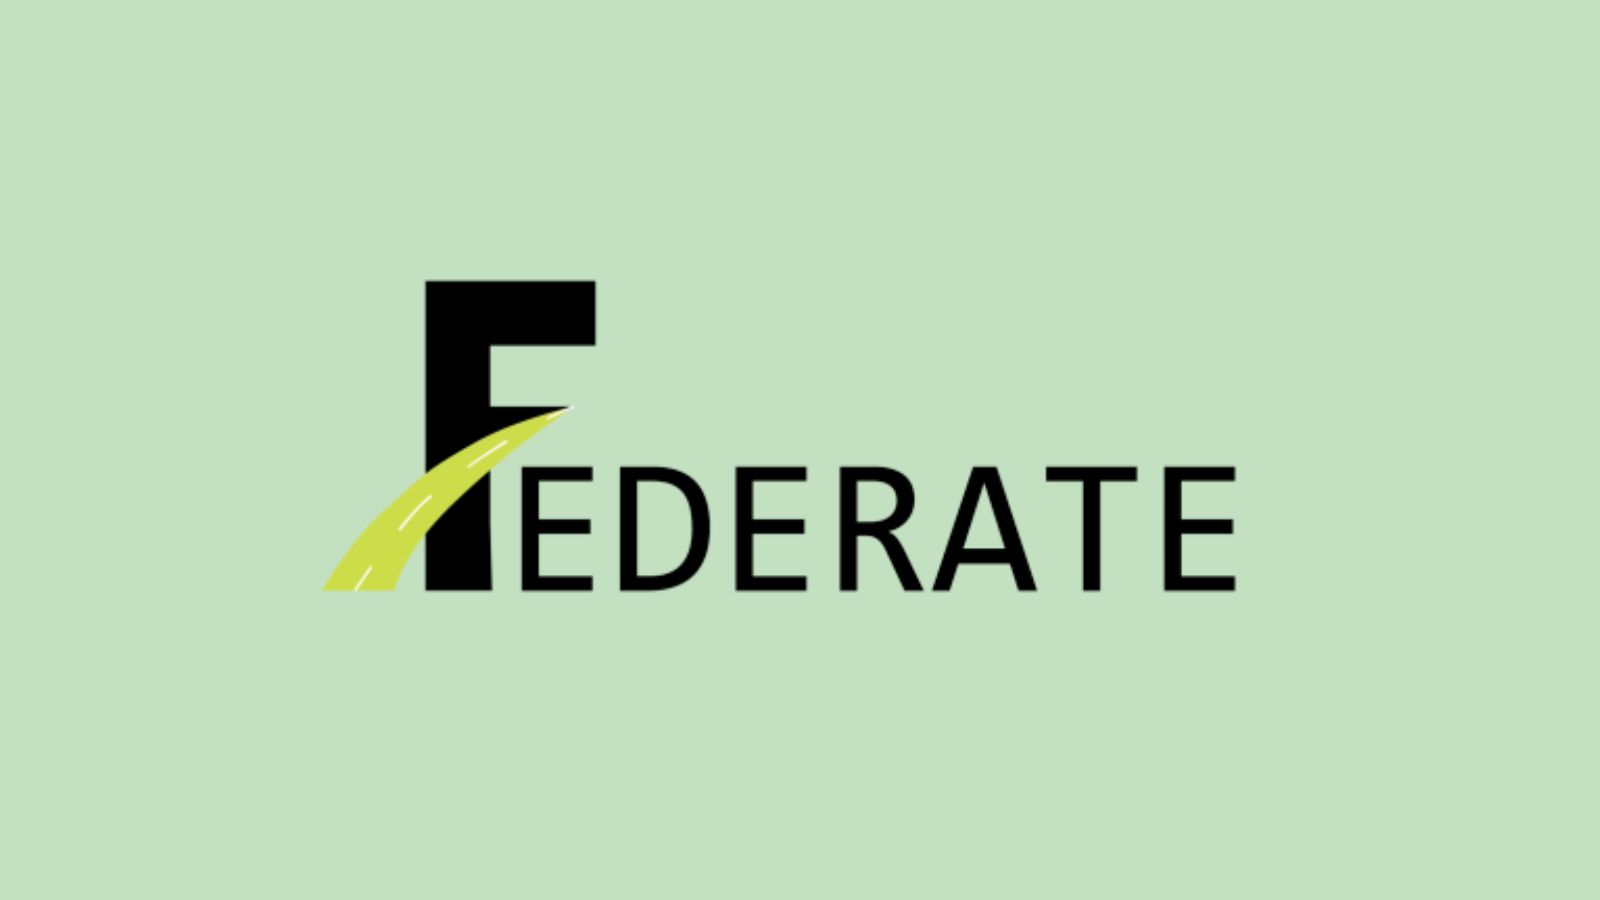 Register for the FEDERATE project newsletter!